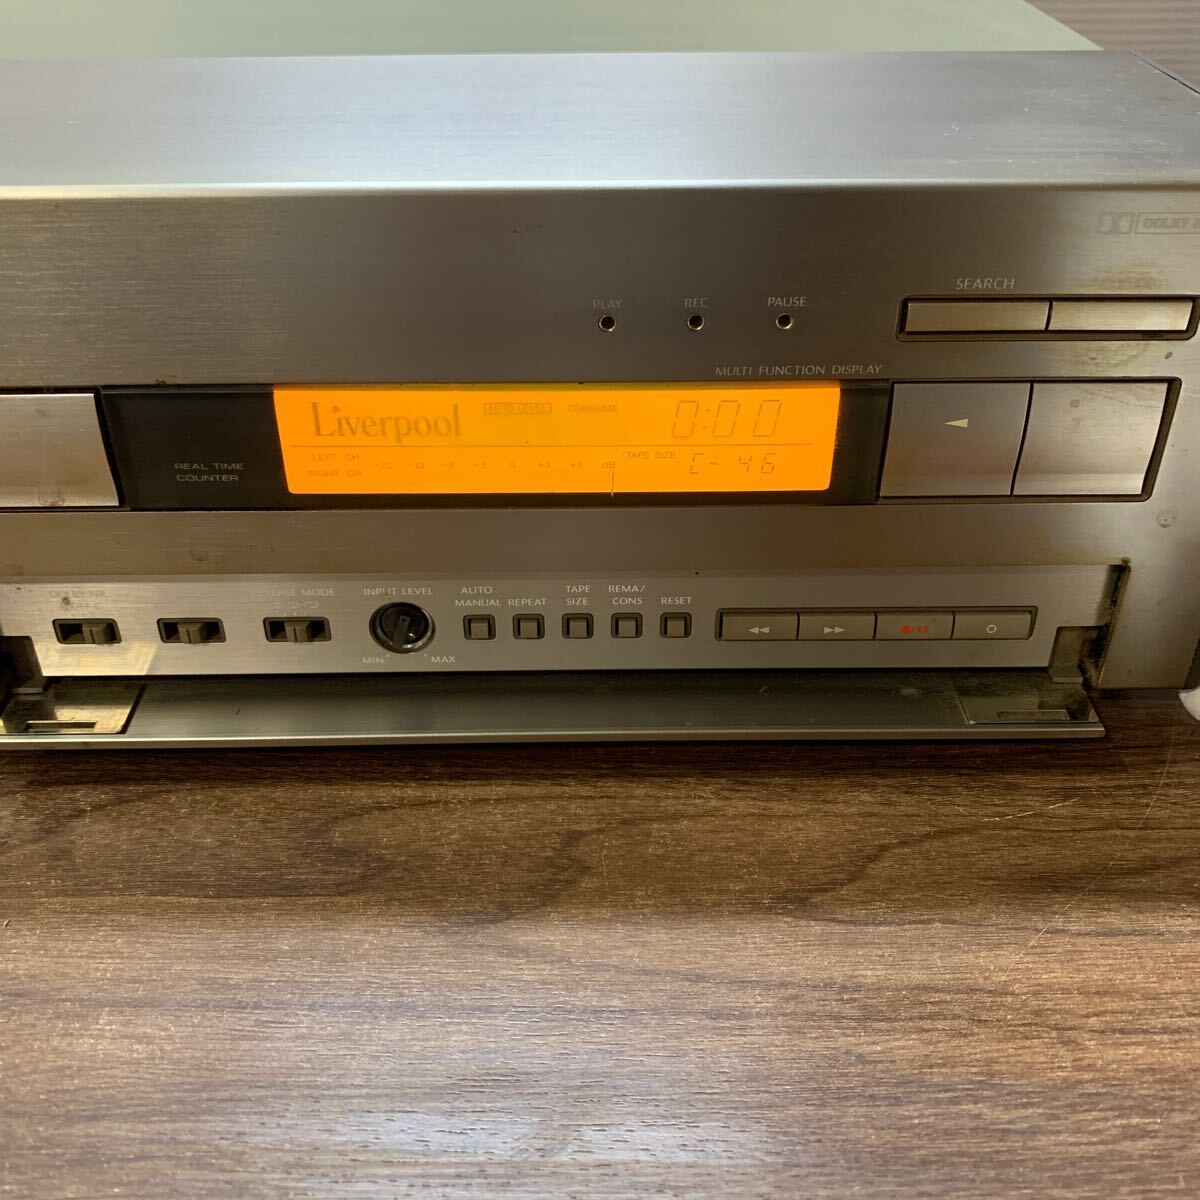 ONKYO Onkyo stereo cassette tape deck K-200A 1990 year made electrification verification settled audio equipment music hobby (A11